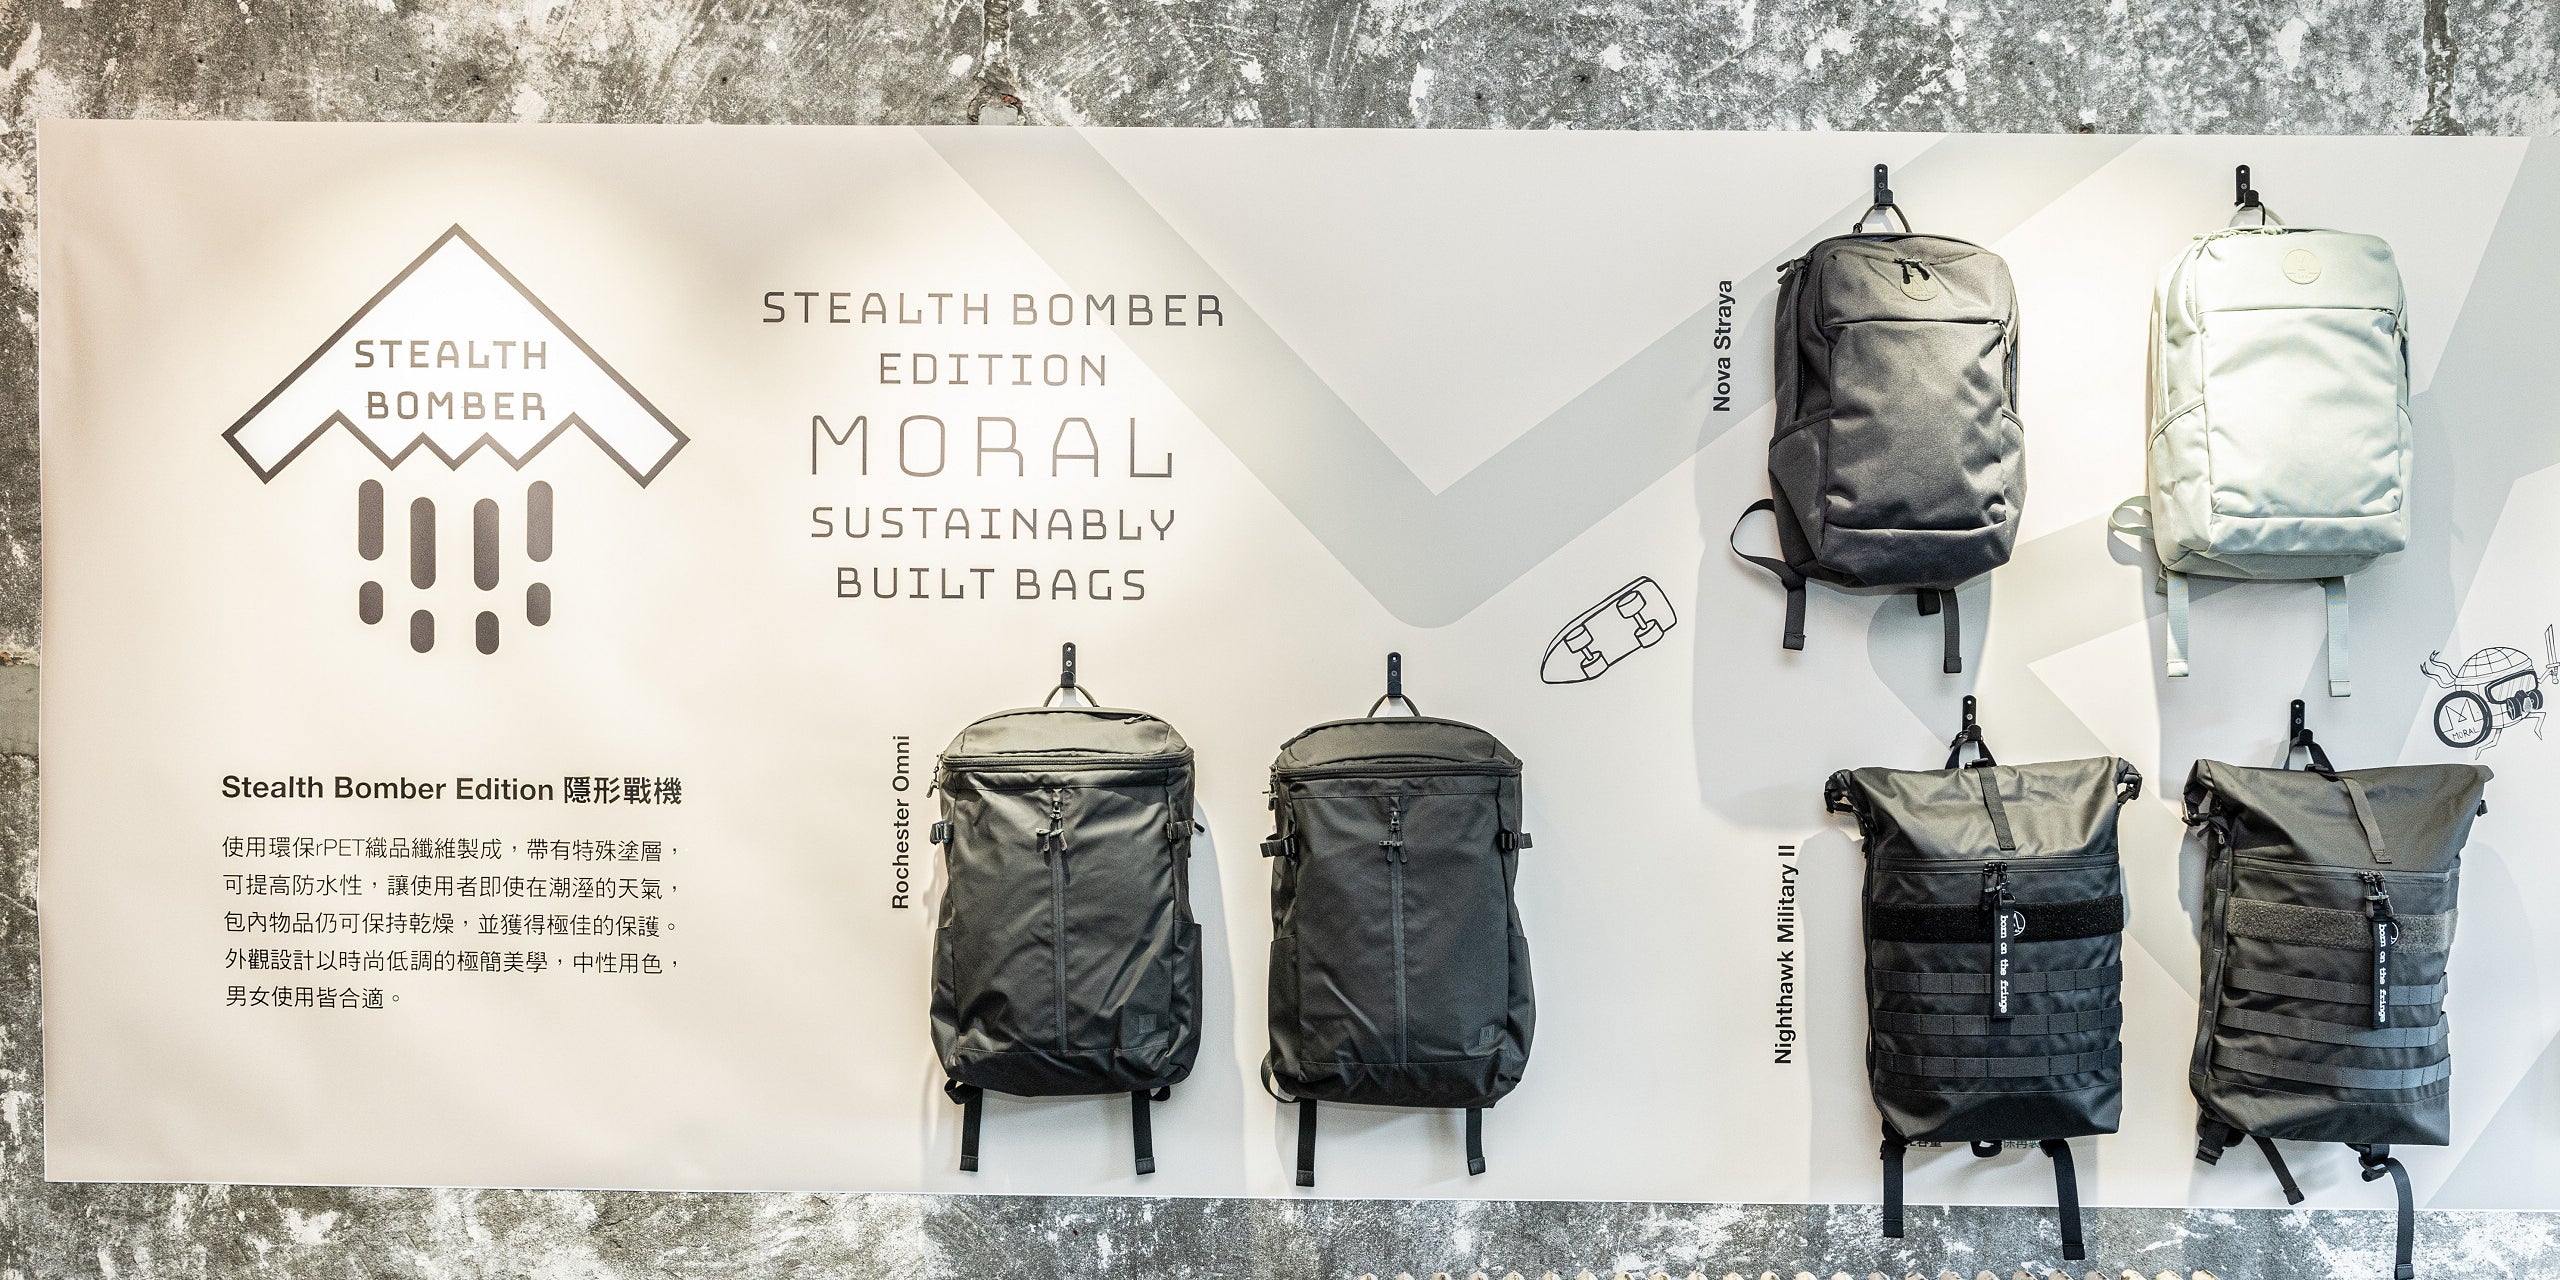 【Moral Bags’ Introductory Taiwan Press Conference】 Spreading the Sustainable Fashion Message in Taiwan